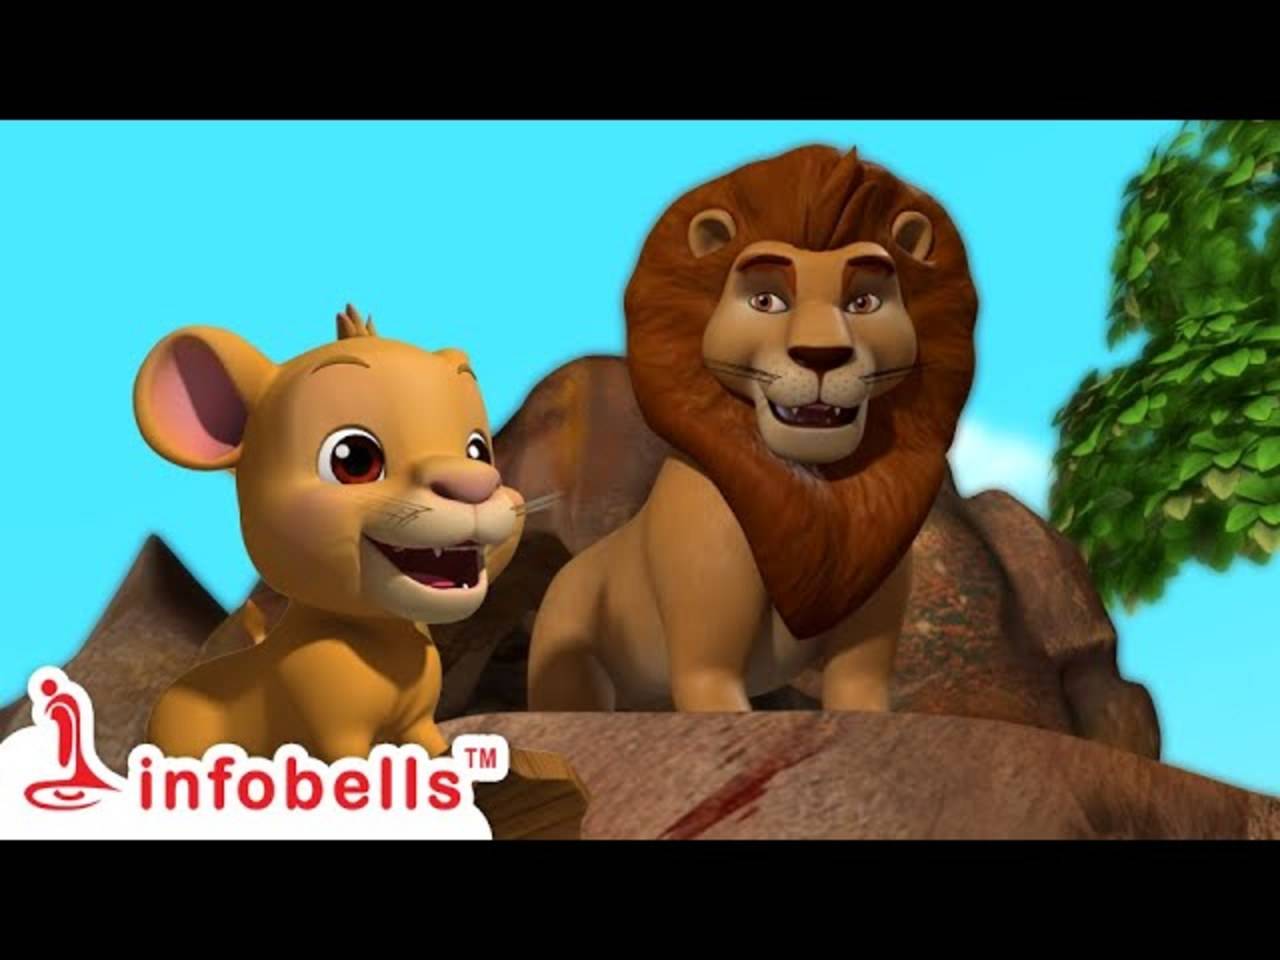 Listen To The Popular Children Bengali Nursery Rhyme 'The Lion Song' For  Kids - Check Out Fun Kids Nursery Rhymes And The Lion Song In Bengali |  Entertainment - Times of India Videos